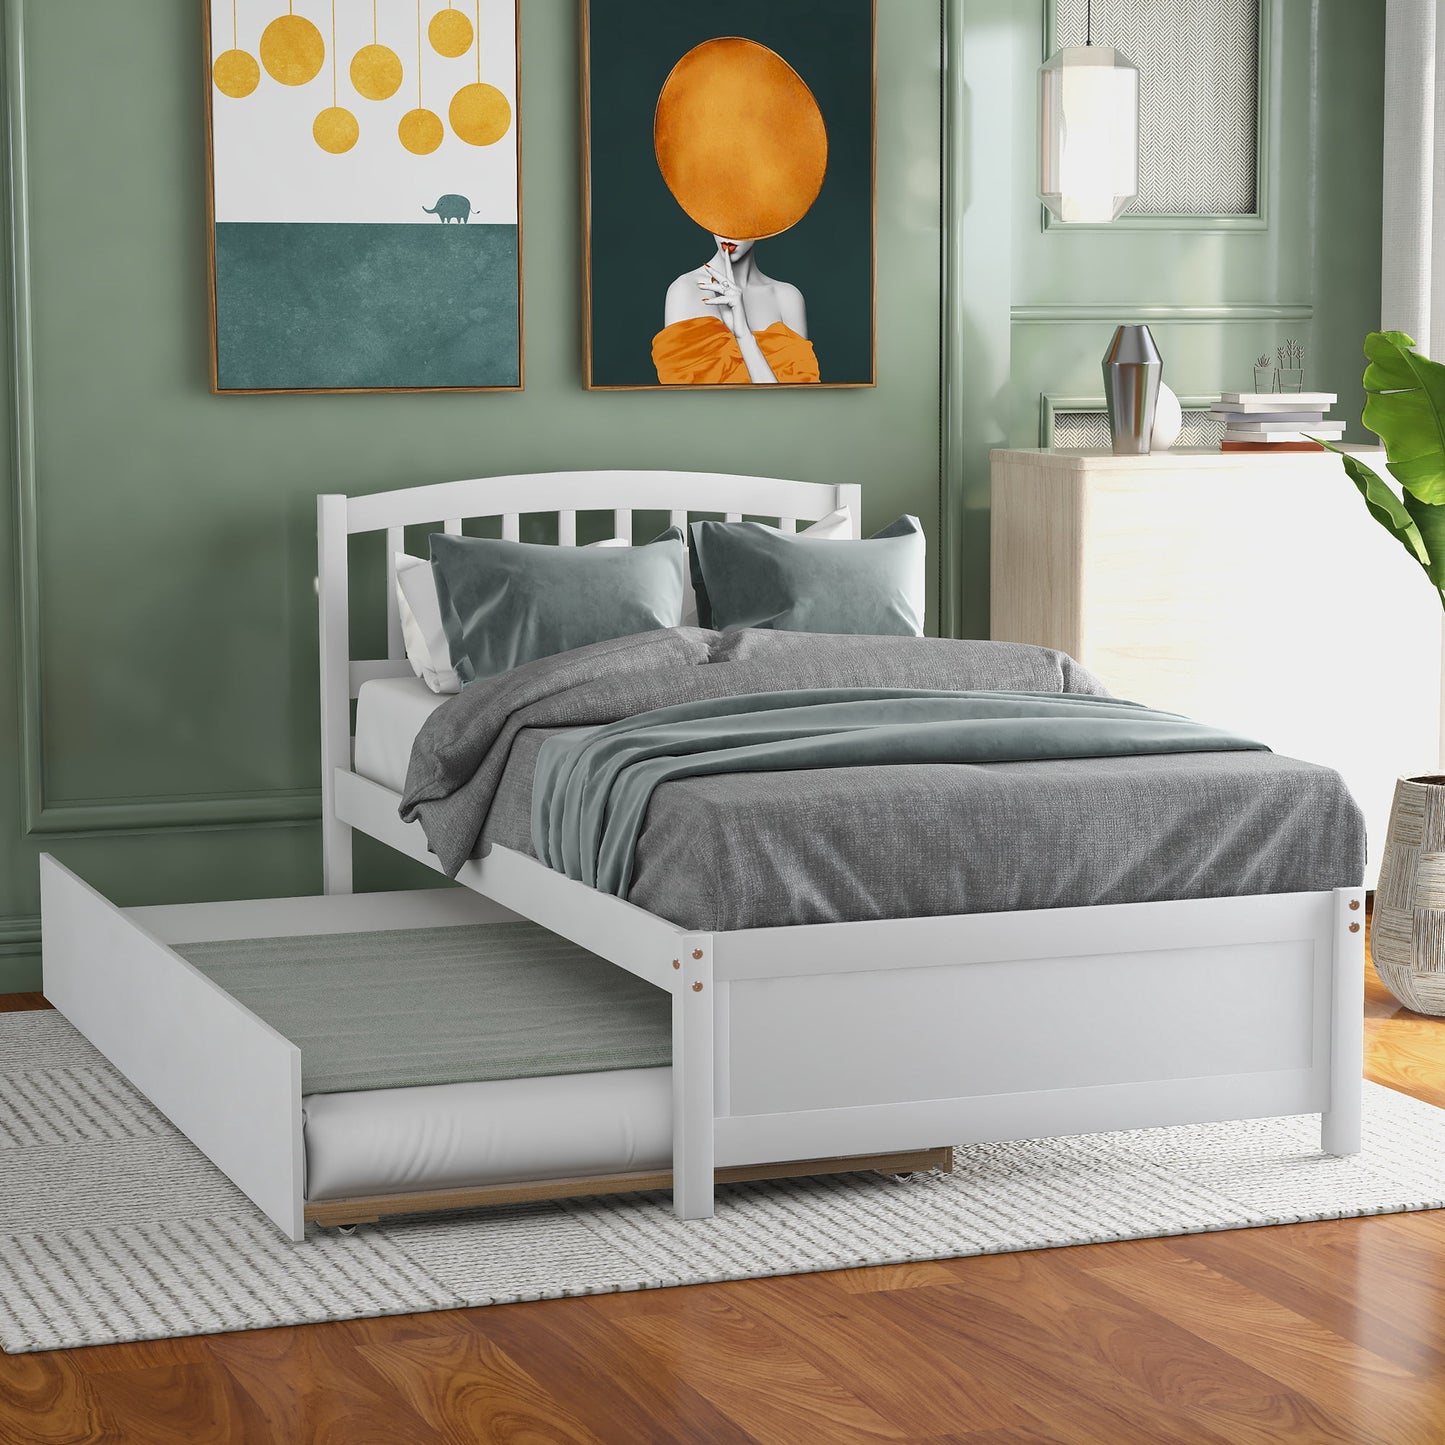 Trundle Bed Twin, Pine Wood Platform Bed Frame Twin Size with Trundle Included and Headboard for Boys Girls Bedroom Small Living Space, No Box Spring Needed, White, LJ3125